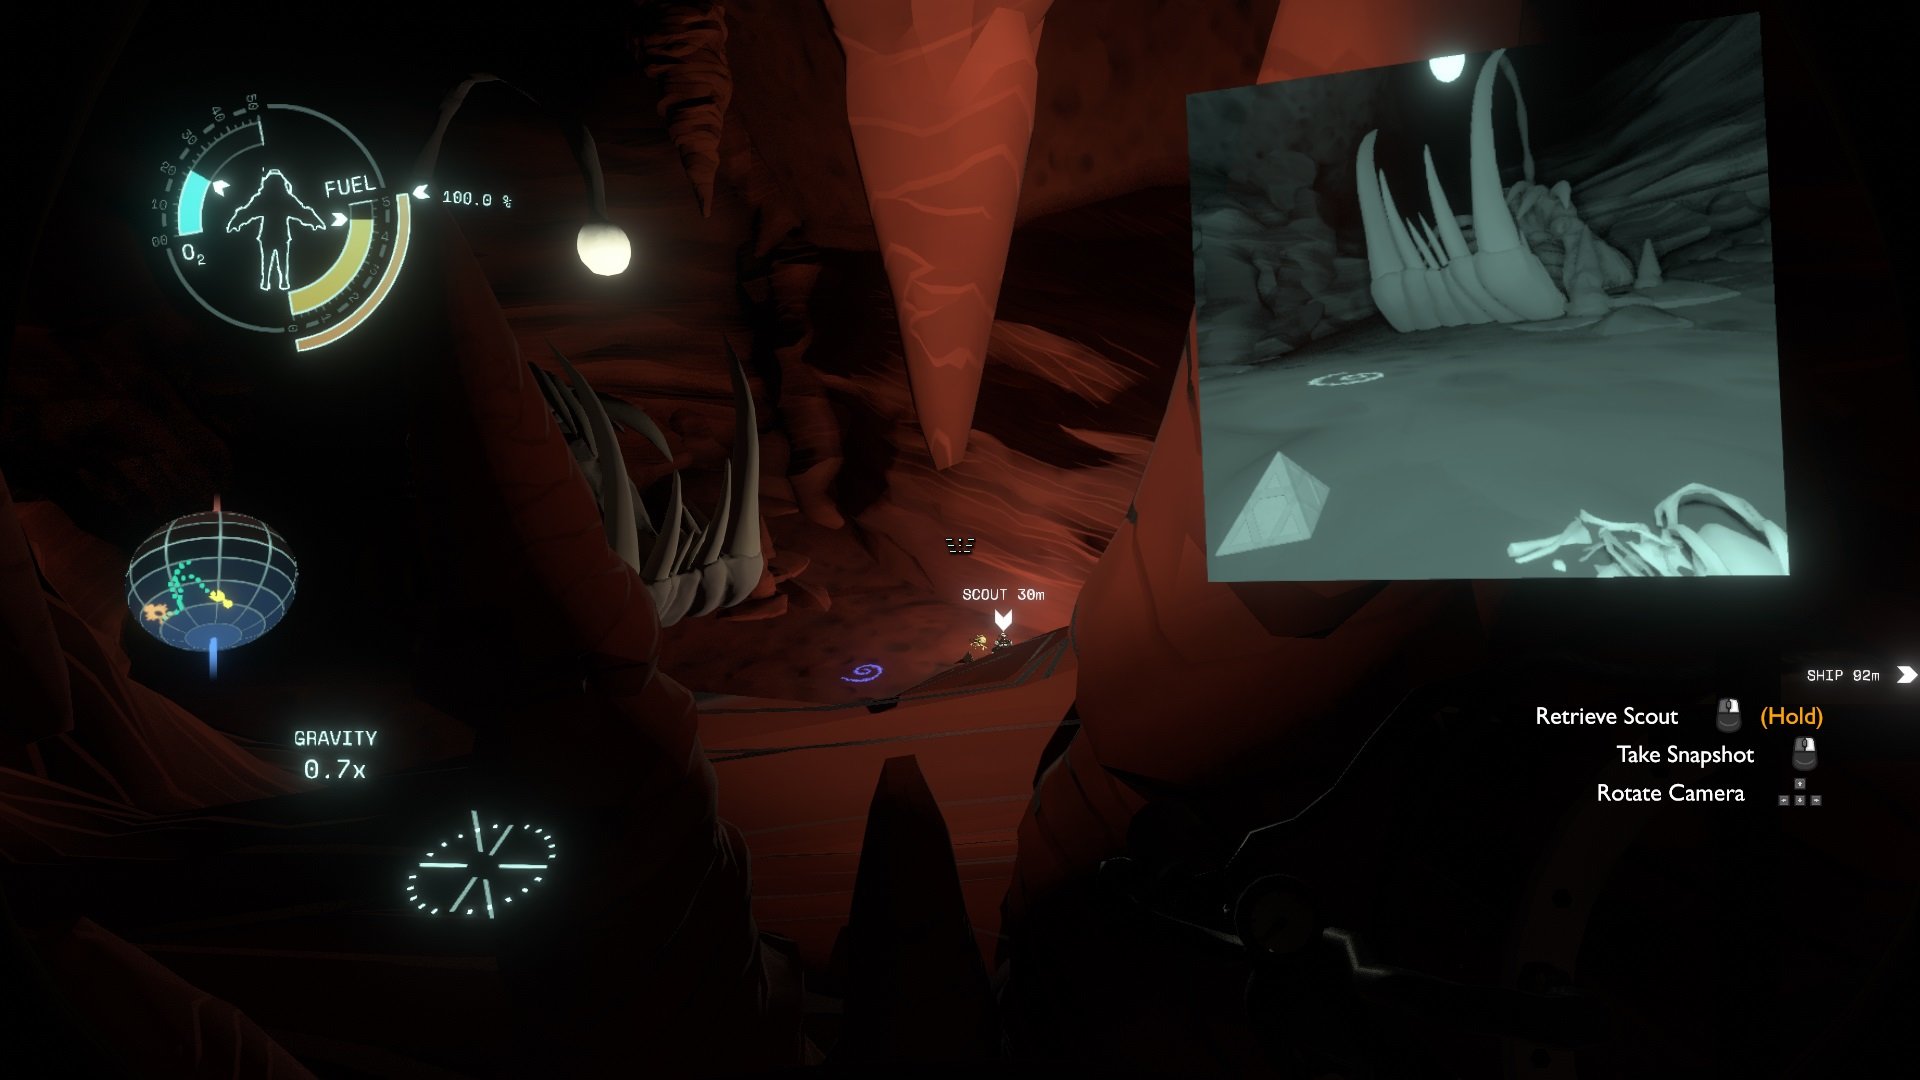 Outer Wilds - Game Overview